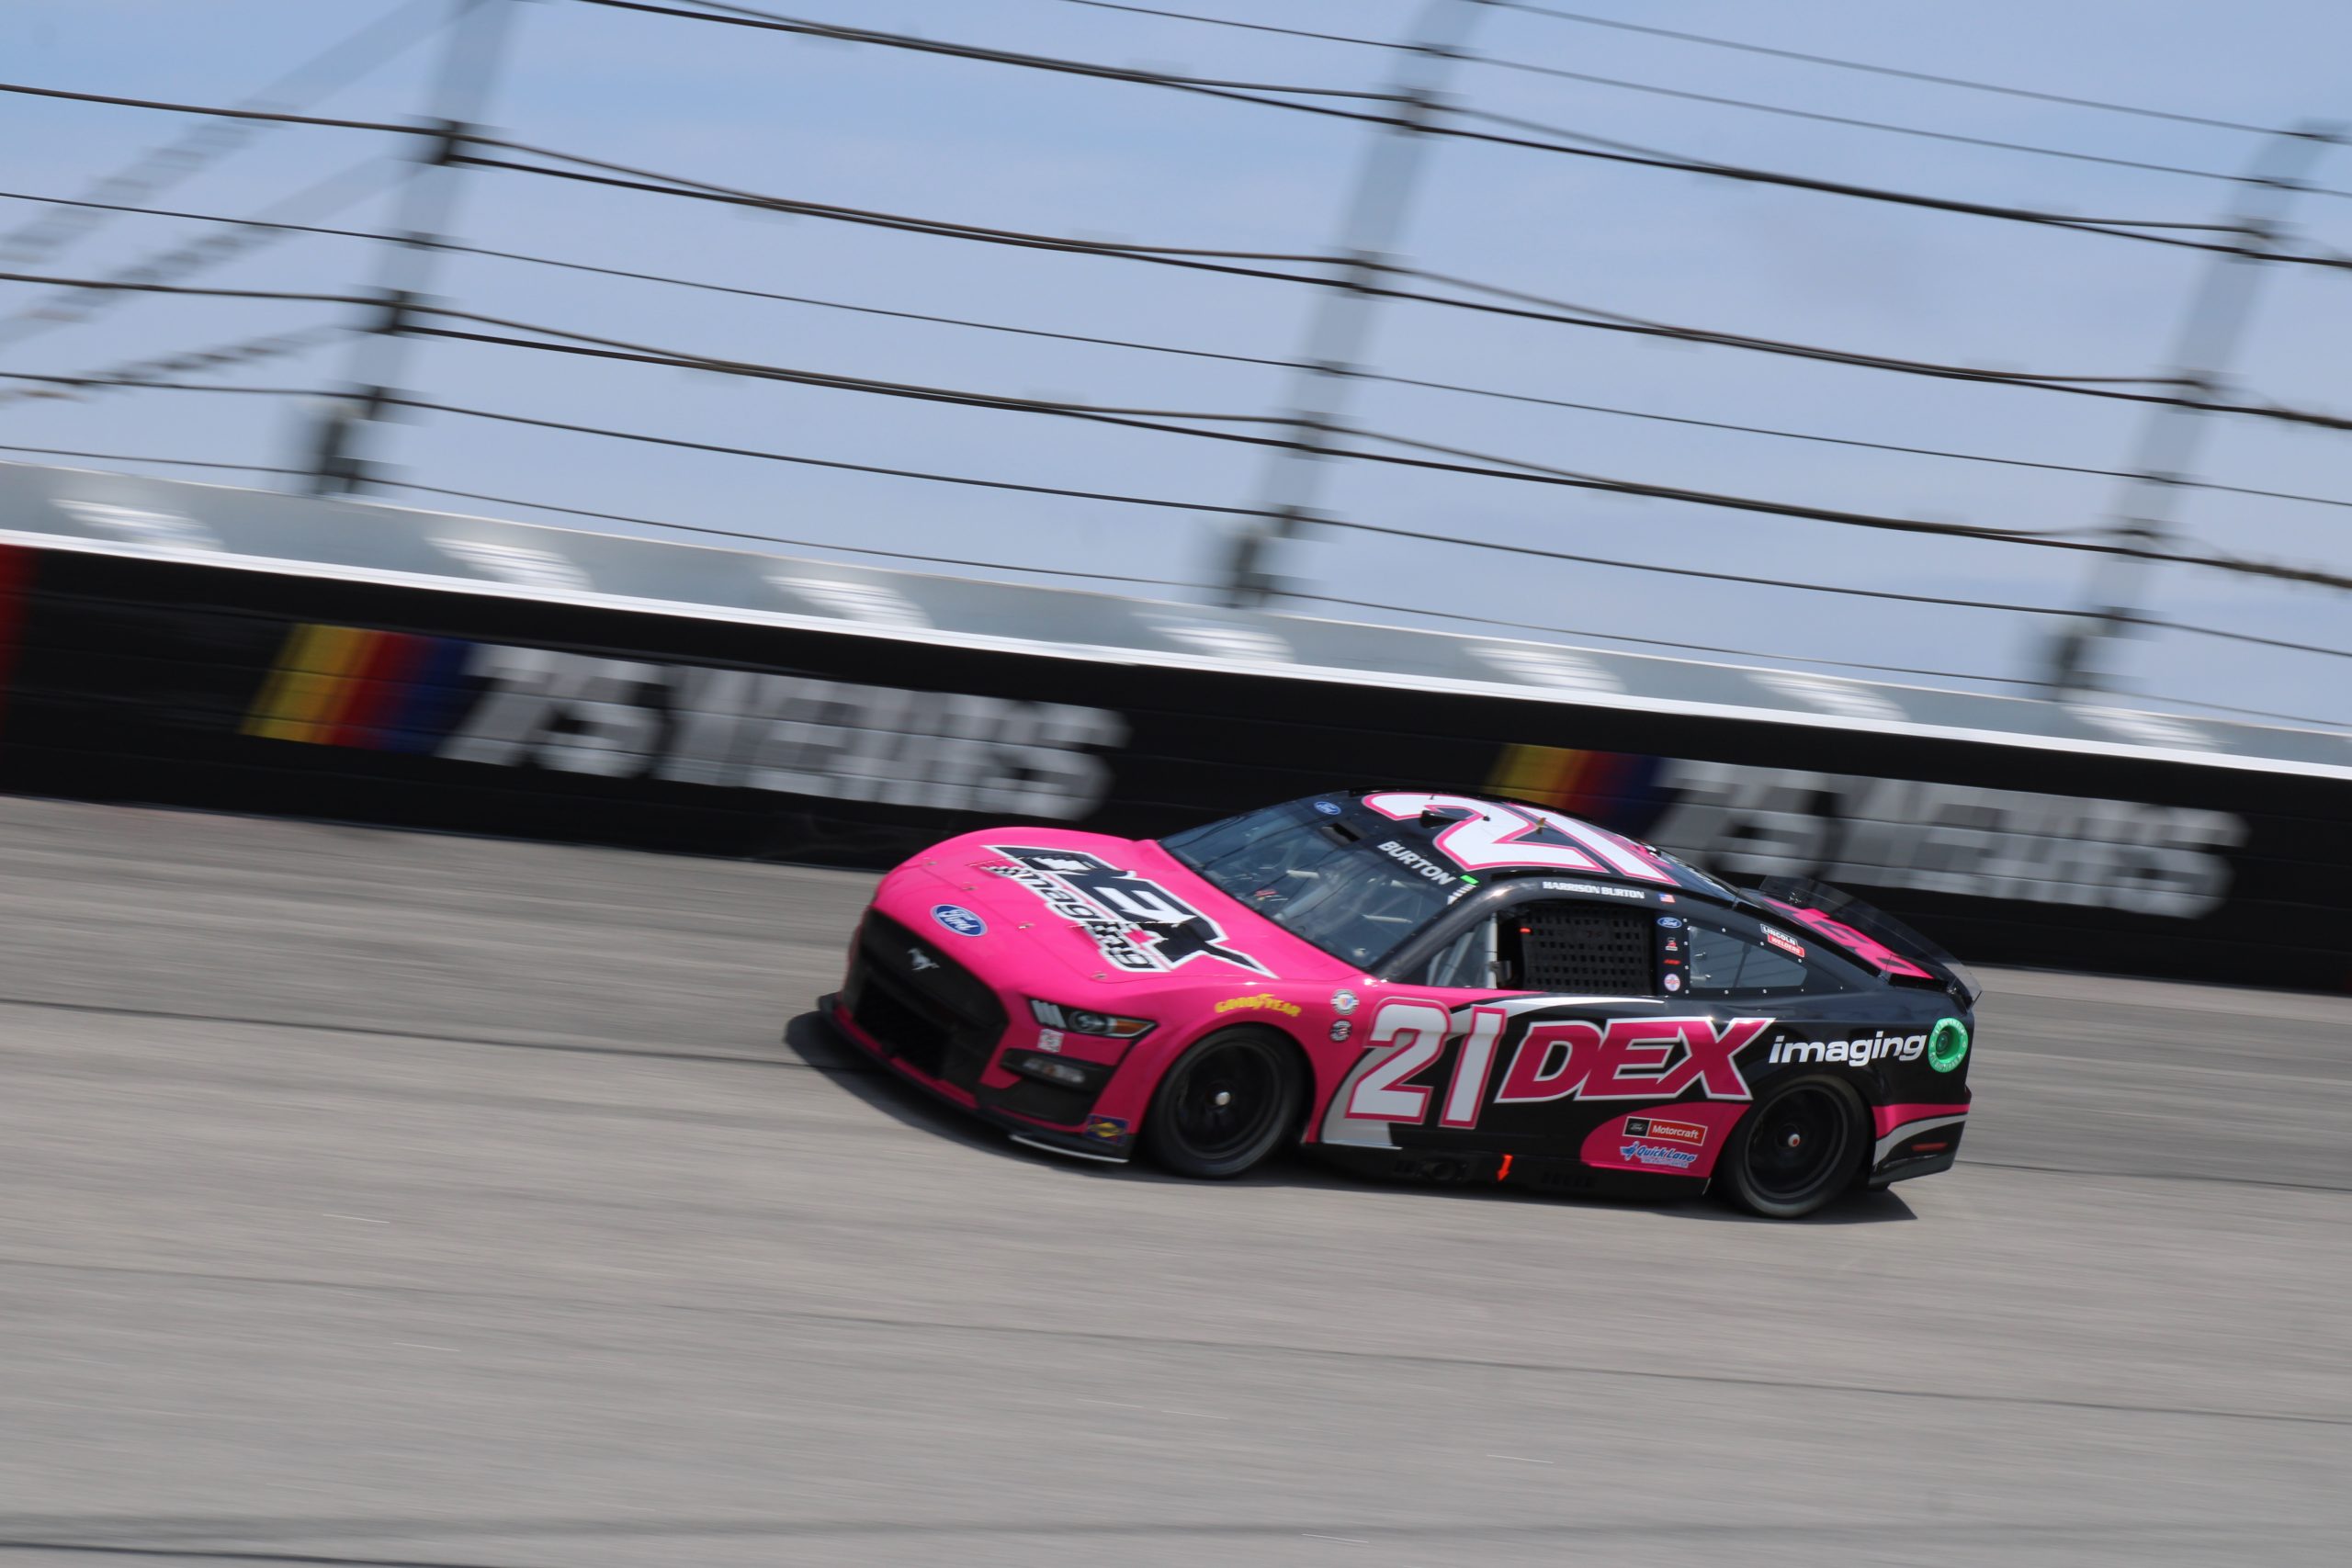 Burton overcame an early pit stop miscue to tally a sixth in the Goodyear 400. (Photo: Trish McCormack | The Podium Finish)